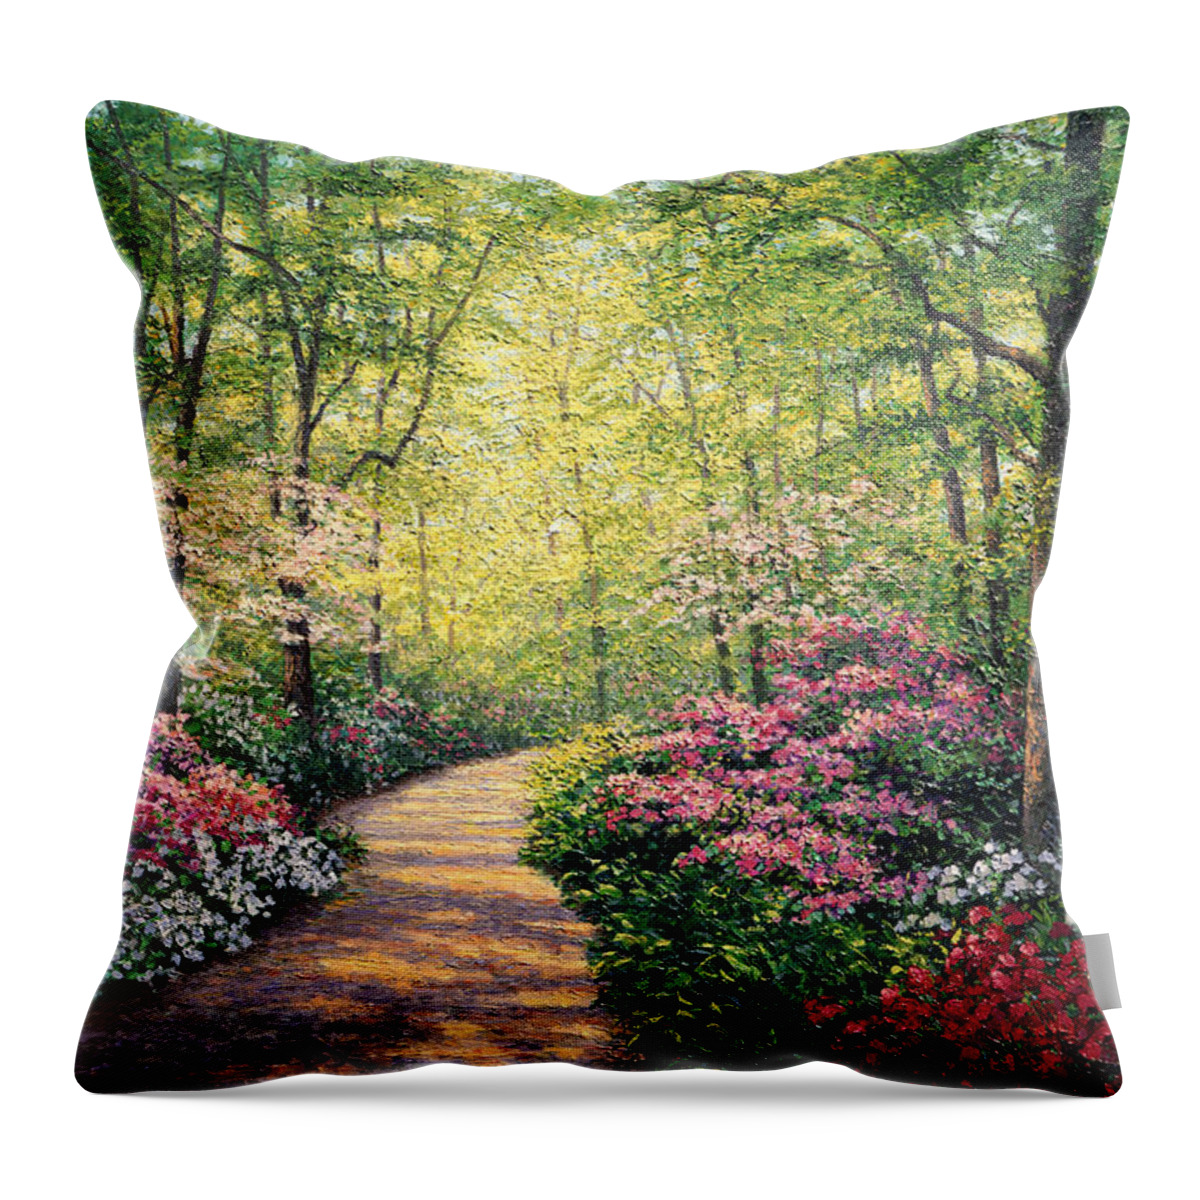 Schaefer Miles Throw Pillow featuring the painting Azalea Path by Kevin Wendy Schaefer Miles